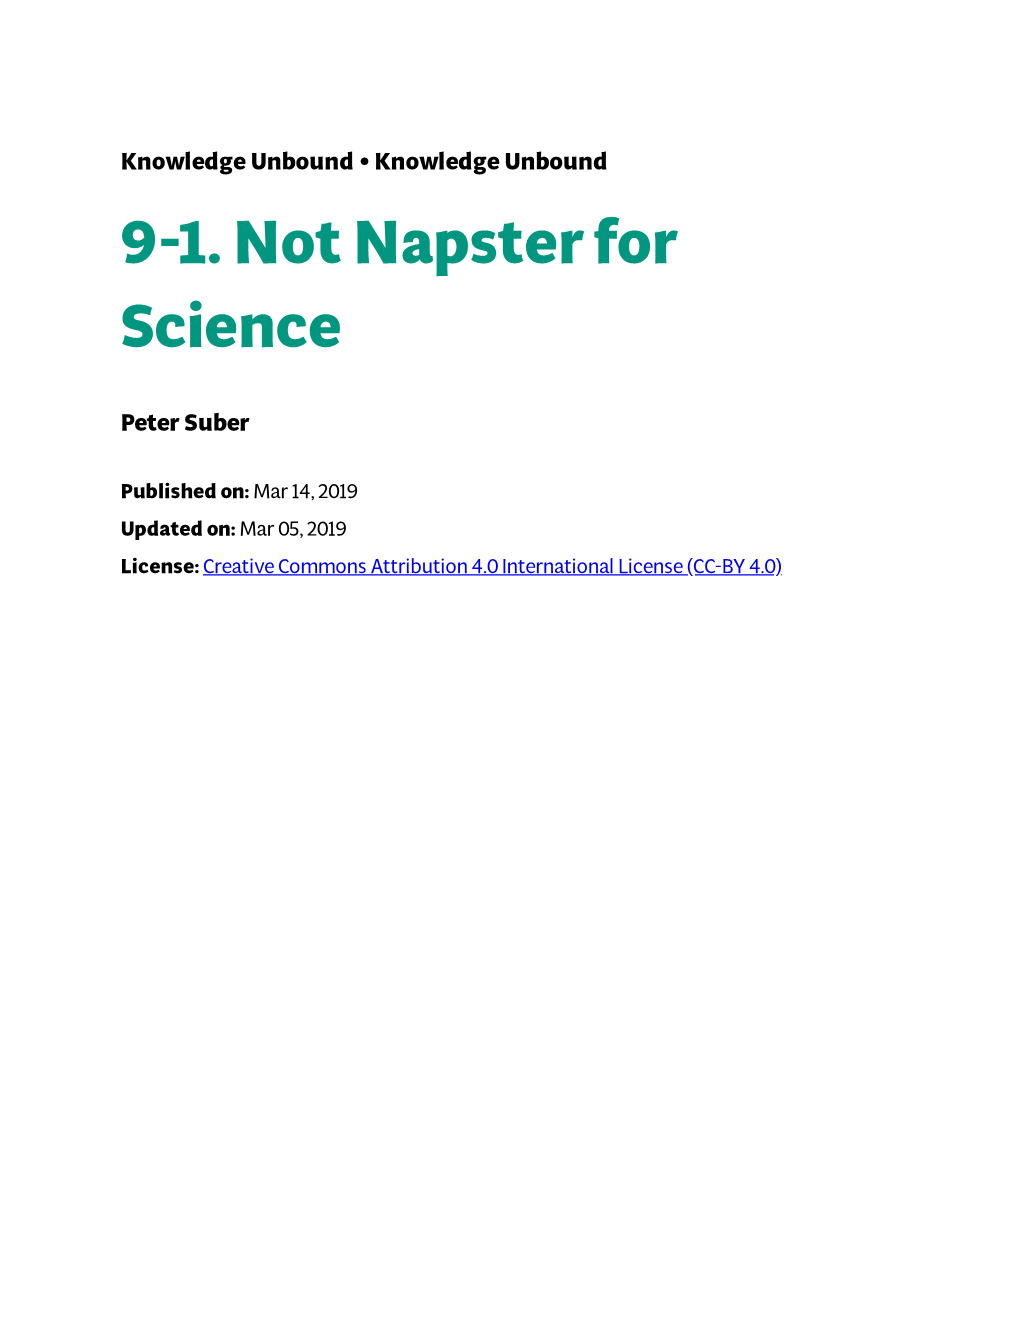 9-1. Not Napster for Science